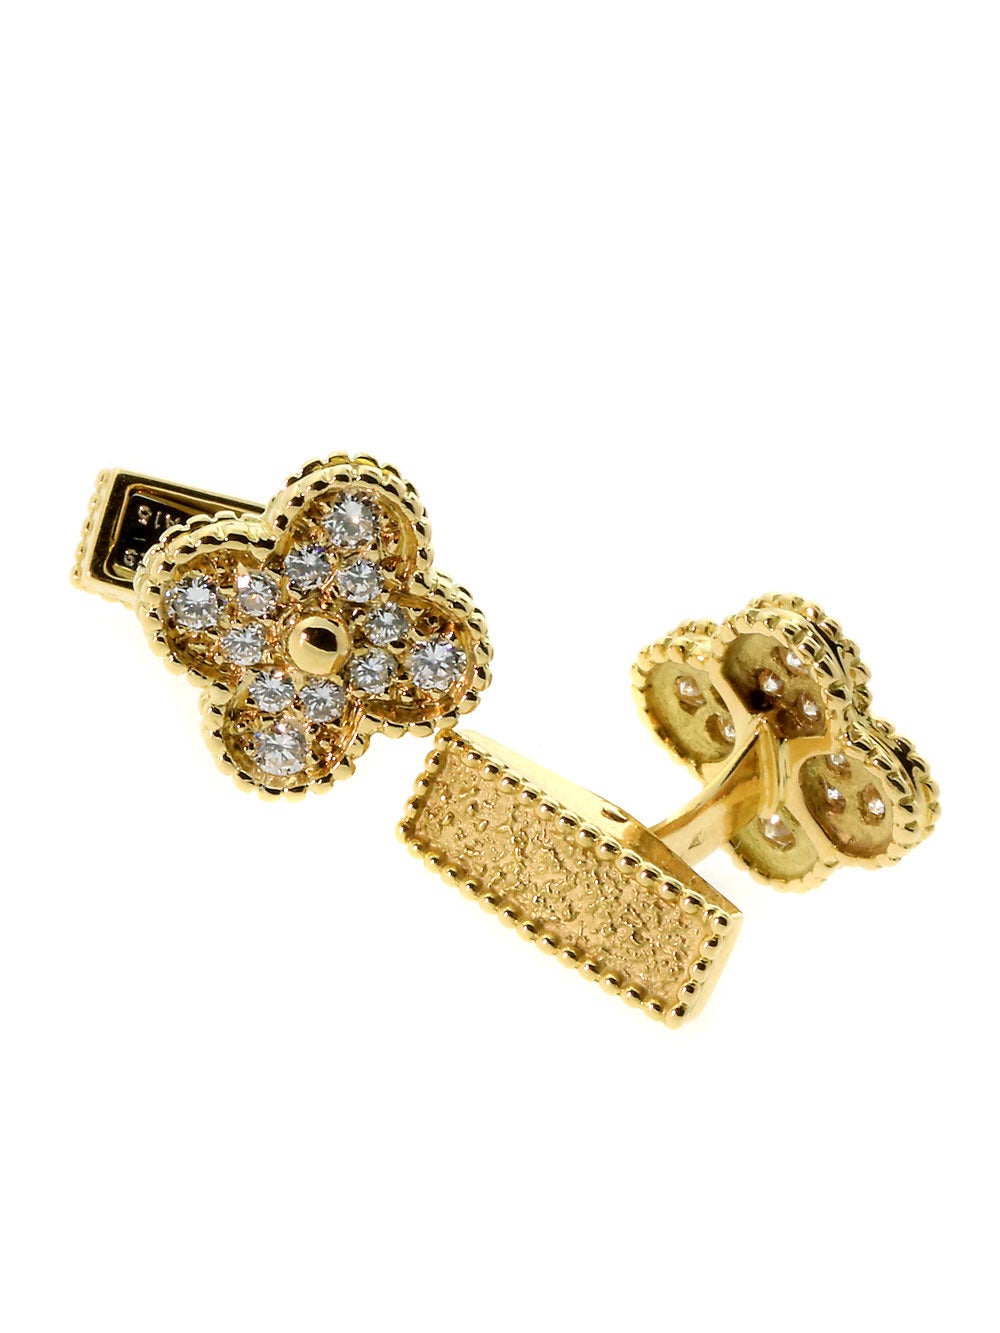 A magnificent pair of authentic Van Cleef & Arpels Alhambra cufflinks in 18k yellow gold set with the finest Van Cleef & Arpels round brilliant cut diamonds (.94ct) Dimensions: 15mm (.59″ inches) in diameter

See a high resolutions video, type 